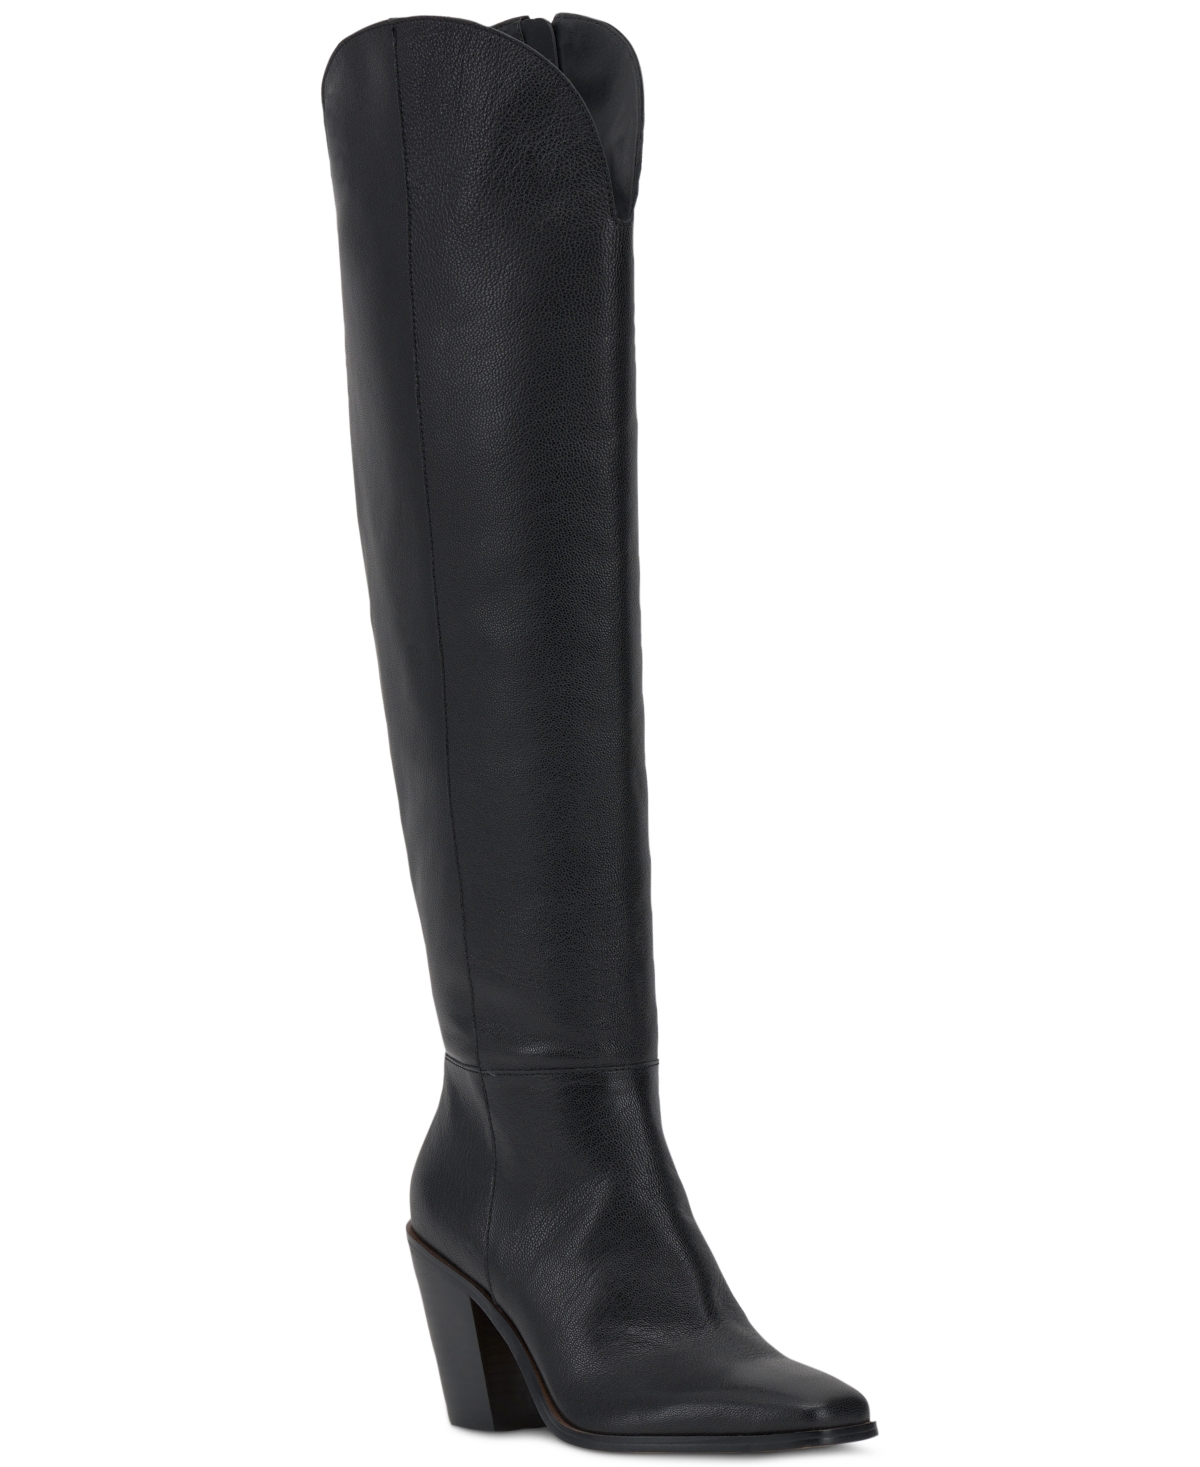 Women's Ravyn Over-The-Knee Boots - Malbec Faux Suede